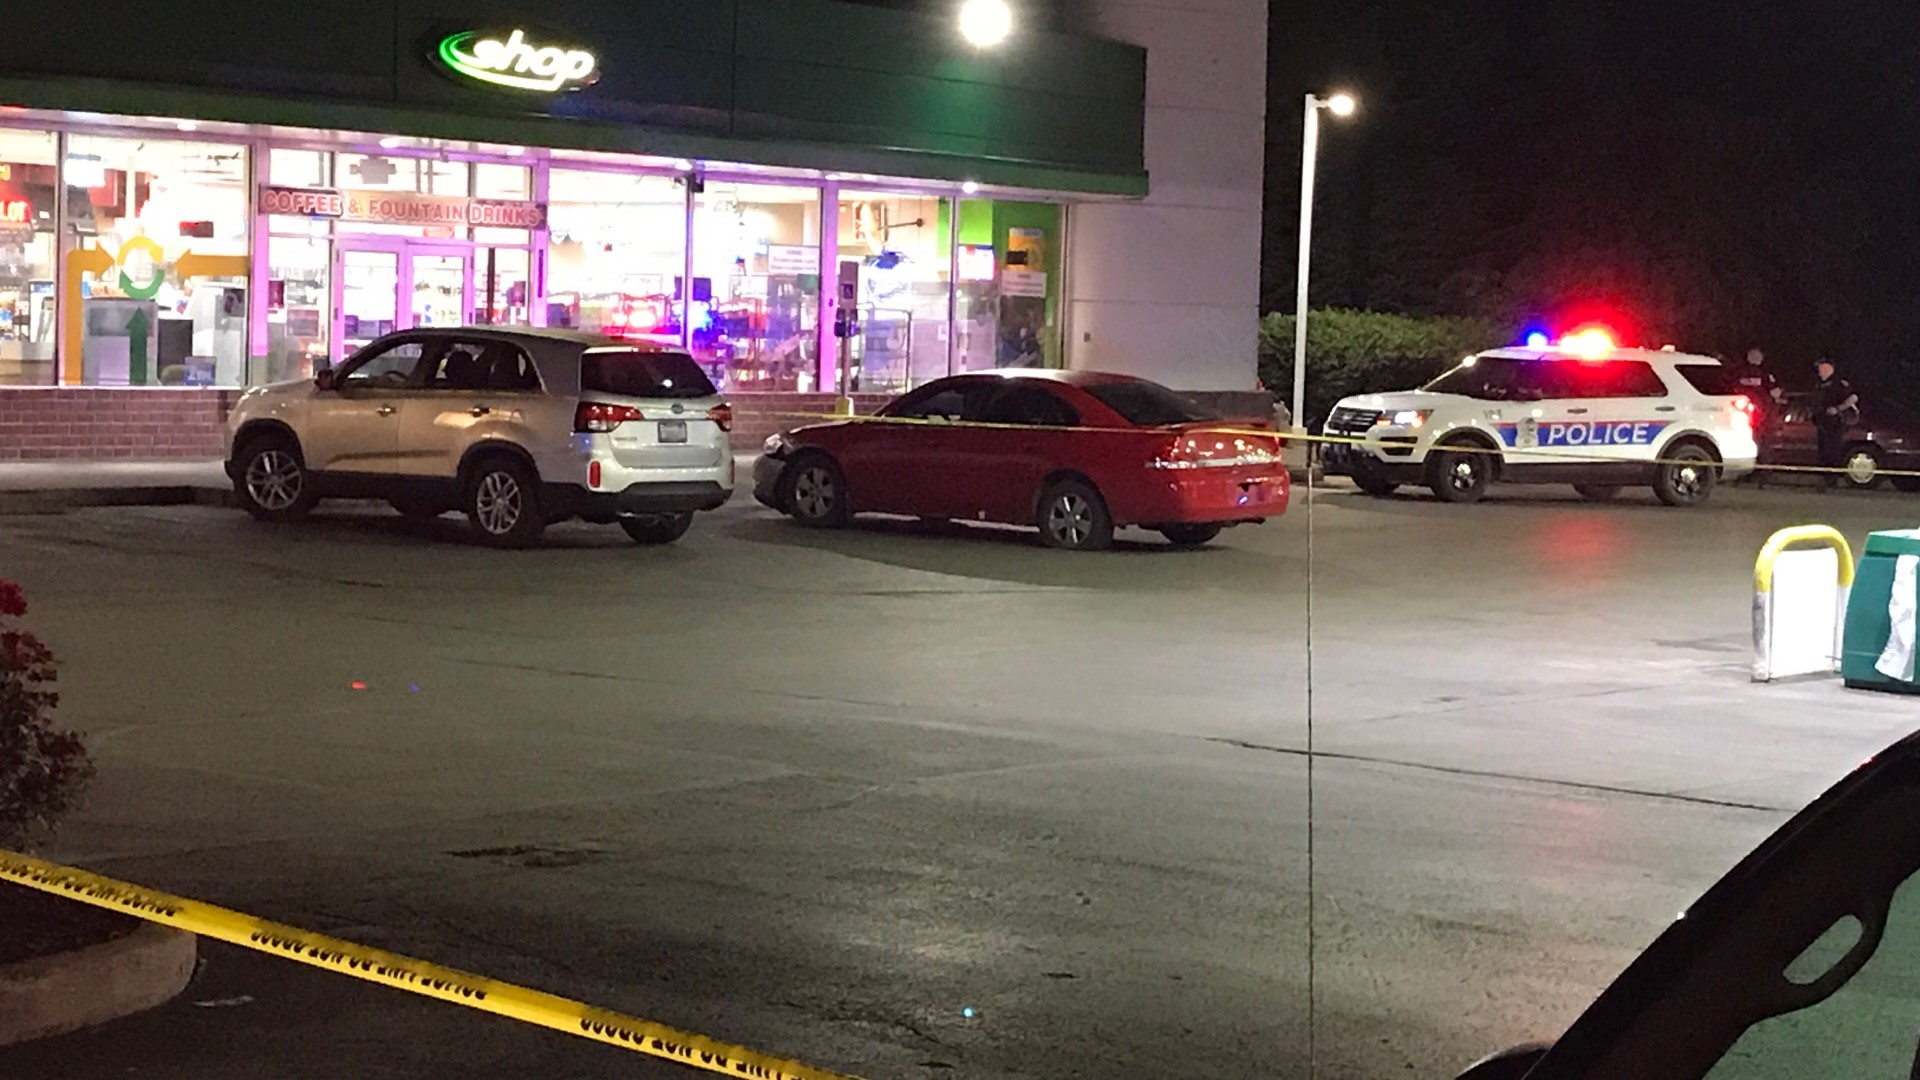 The shooting happened in front of a BP gas station on the 2800 block of Sullivant Avenue just after 1:30 a.m., according to Columbus Police.